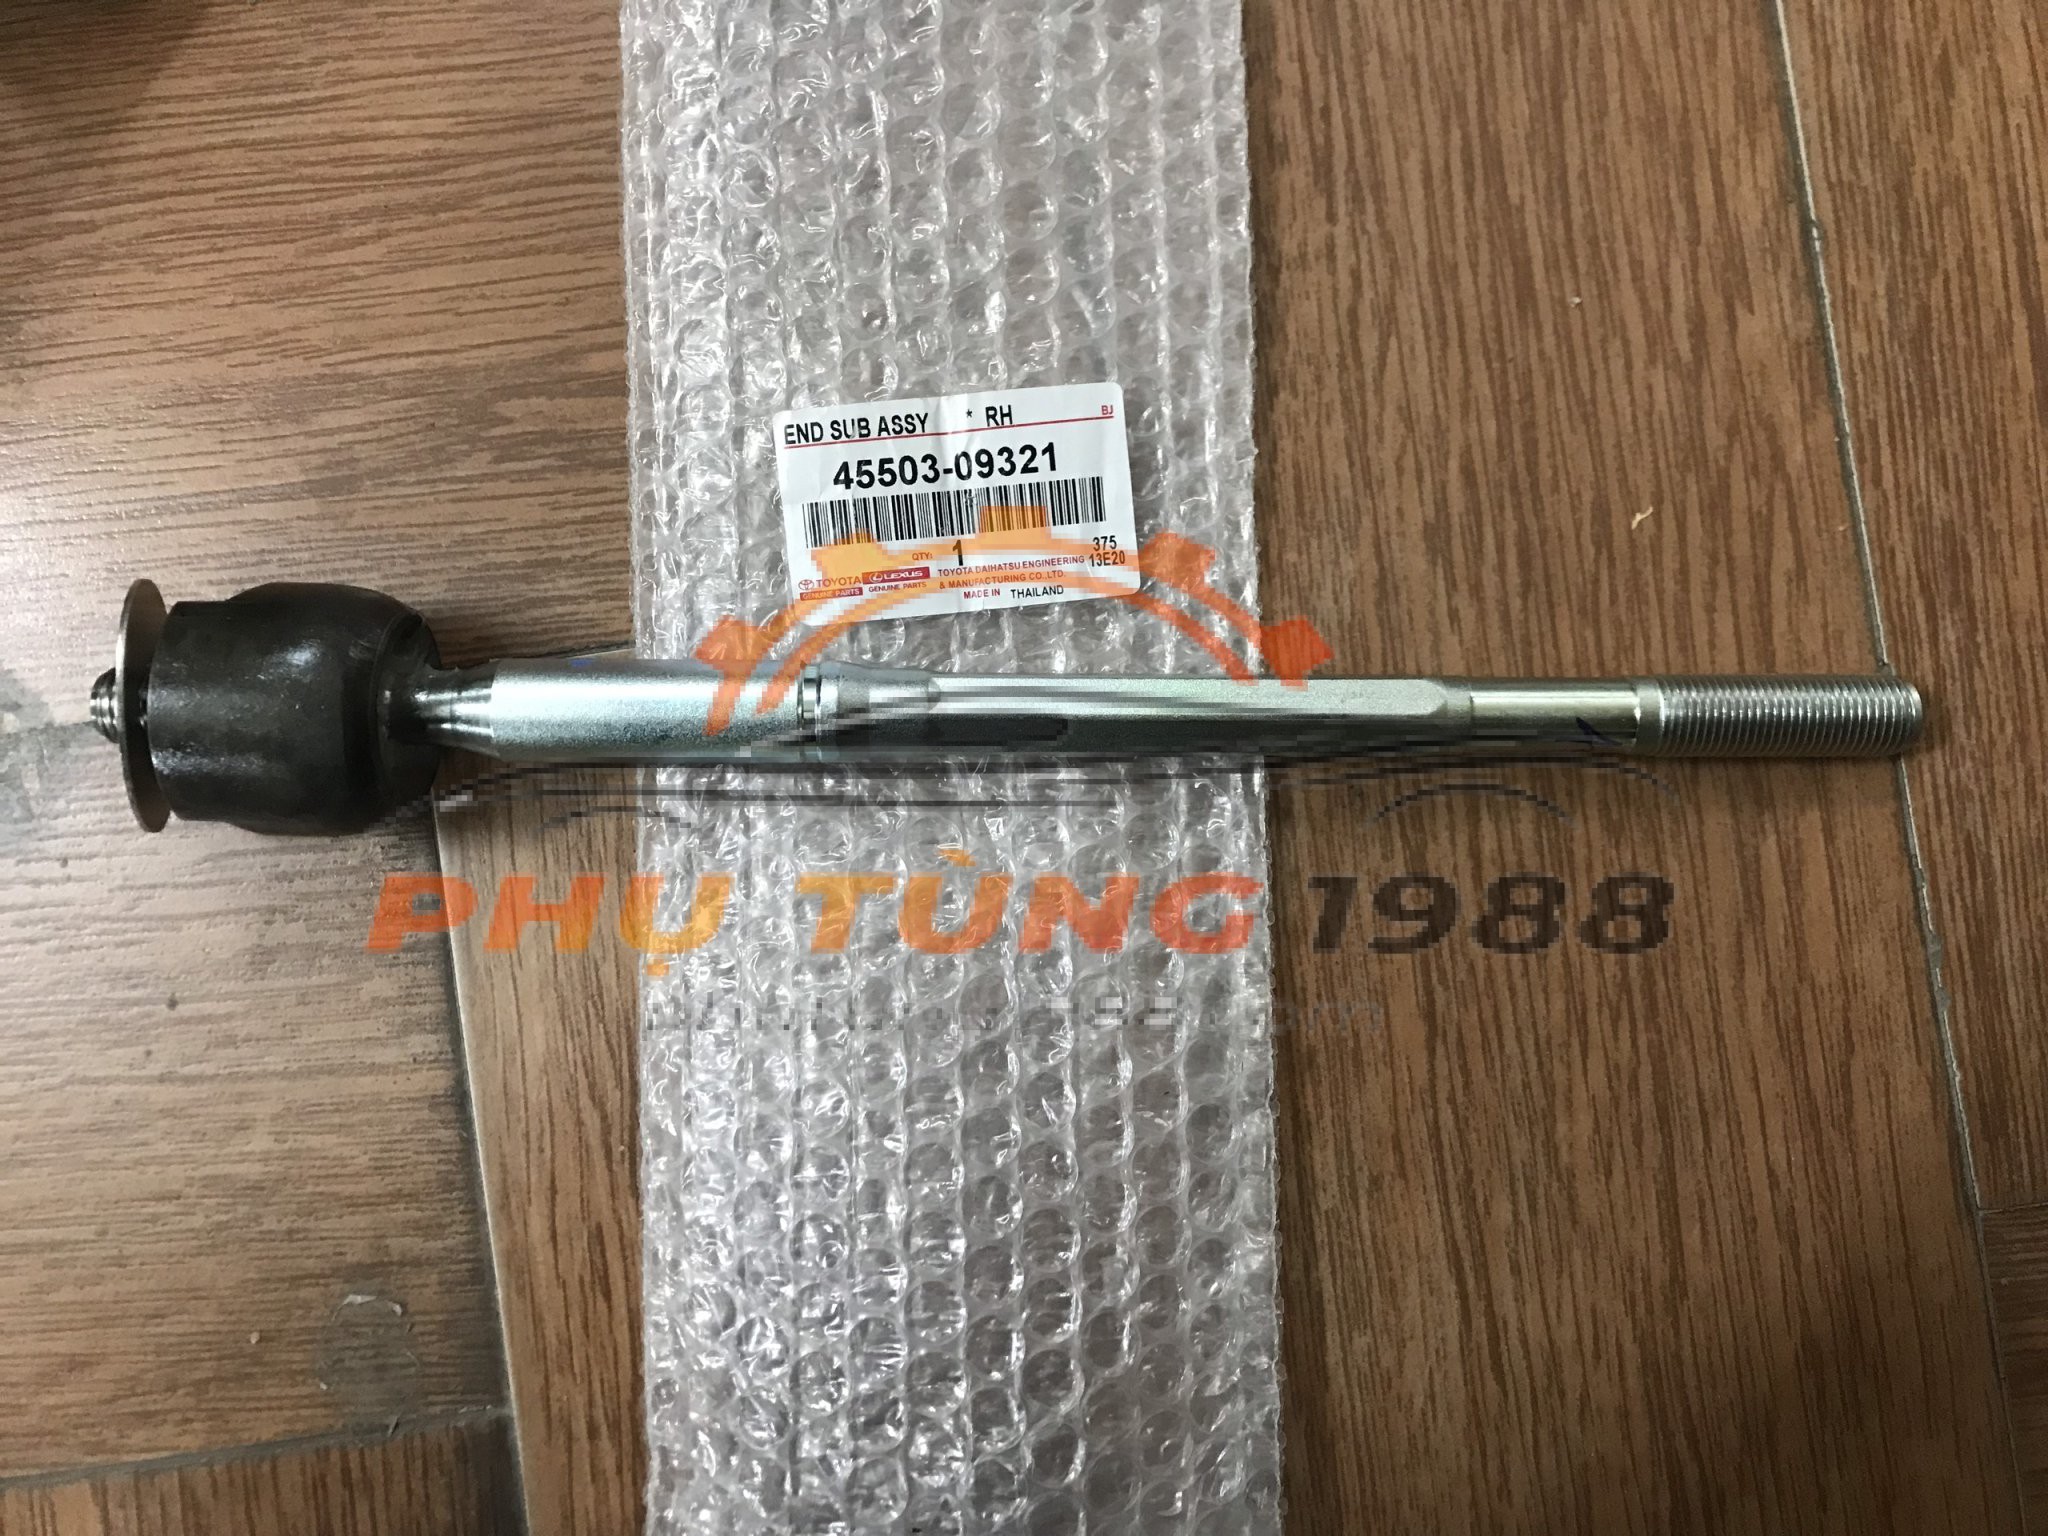 Rotuyn lái trong Toyota Fortuner 2009-2015 4550309321